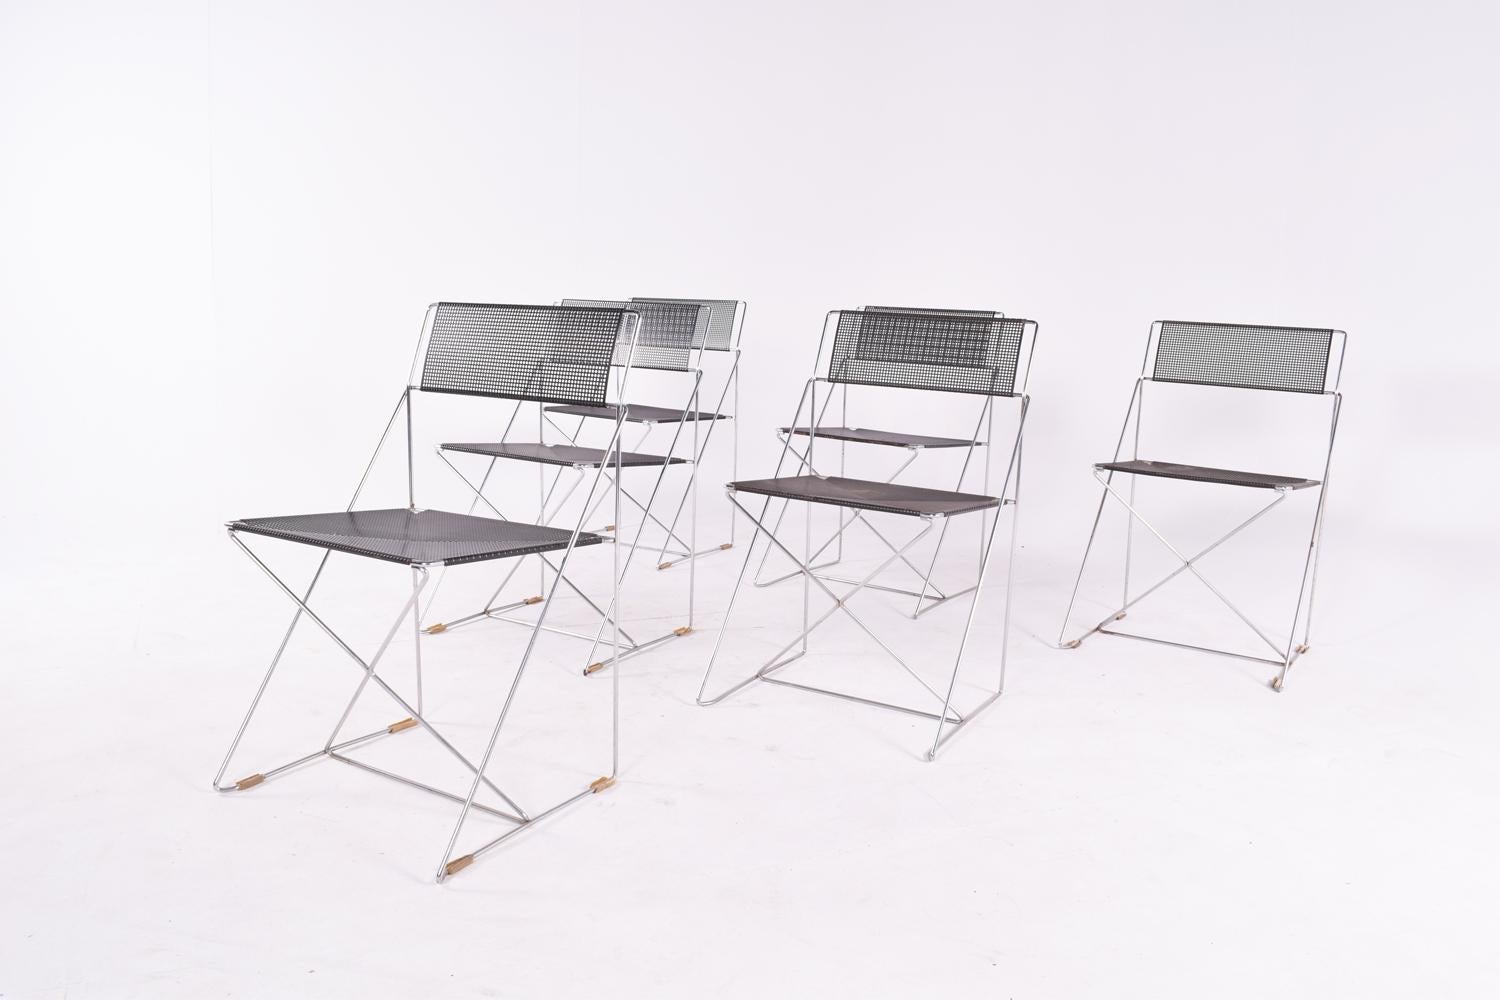 Set of 6 dining chairs in X-line, made of chrome-plated steel rods and black enameled perforated steel backs and seats. Designed by Niels Jorgen Haugesen for Magis. These chairs are stackable. Denmark.